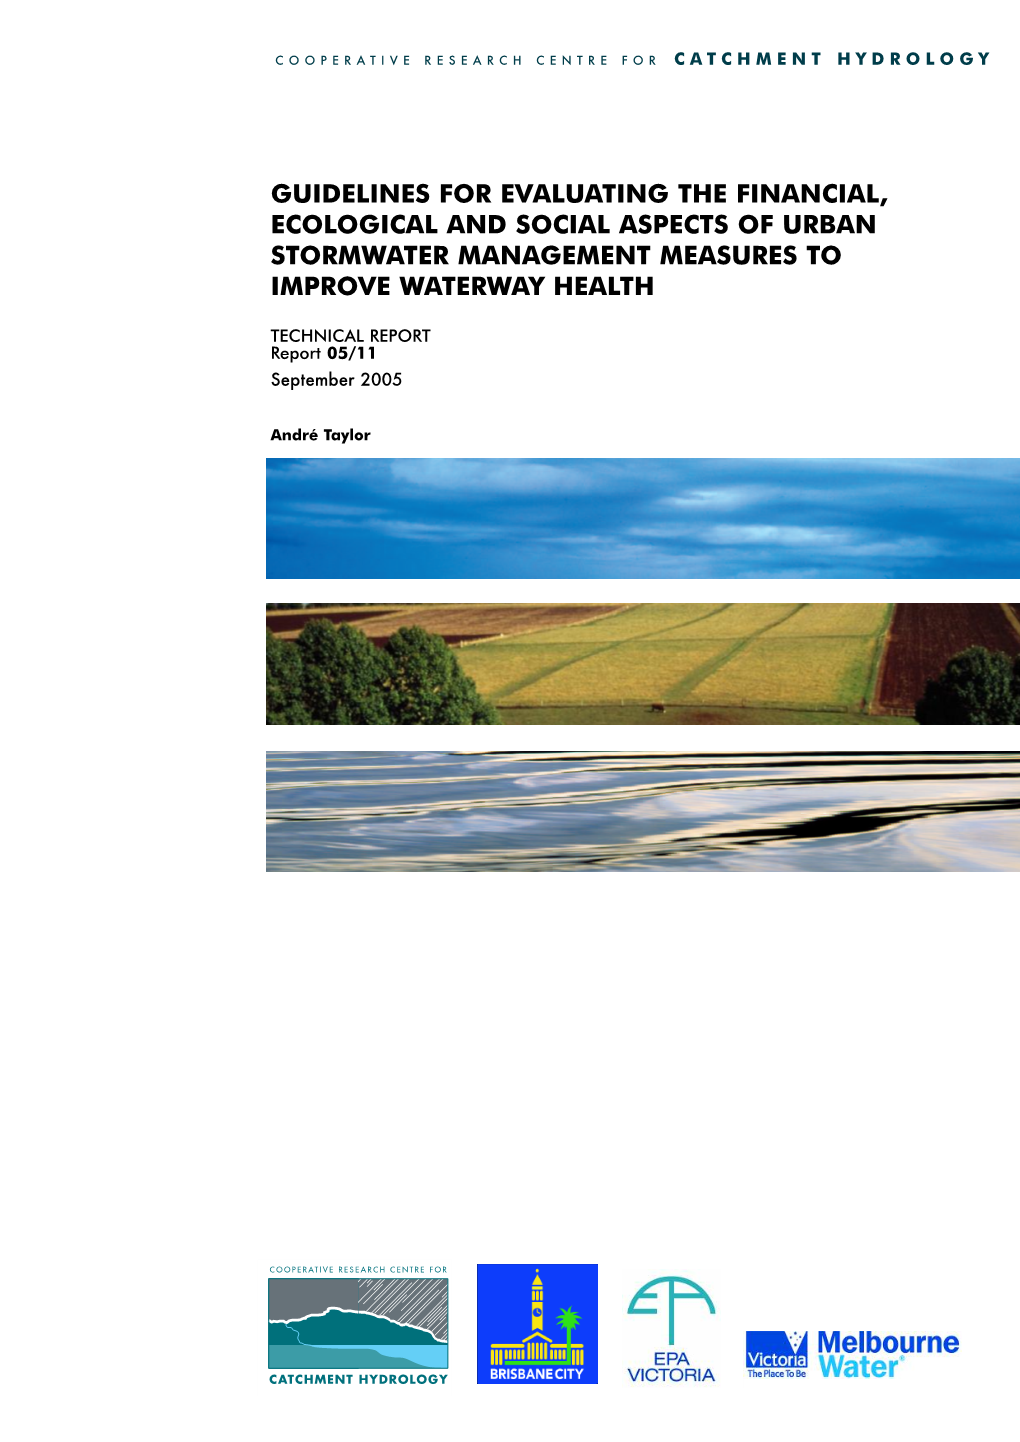 Guidelines for Evaluating the Financial, Ecological and Social Aspects of Urban Stormwater Management Measures to Improve Waterway Health